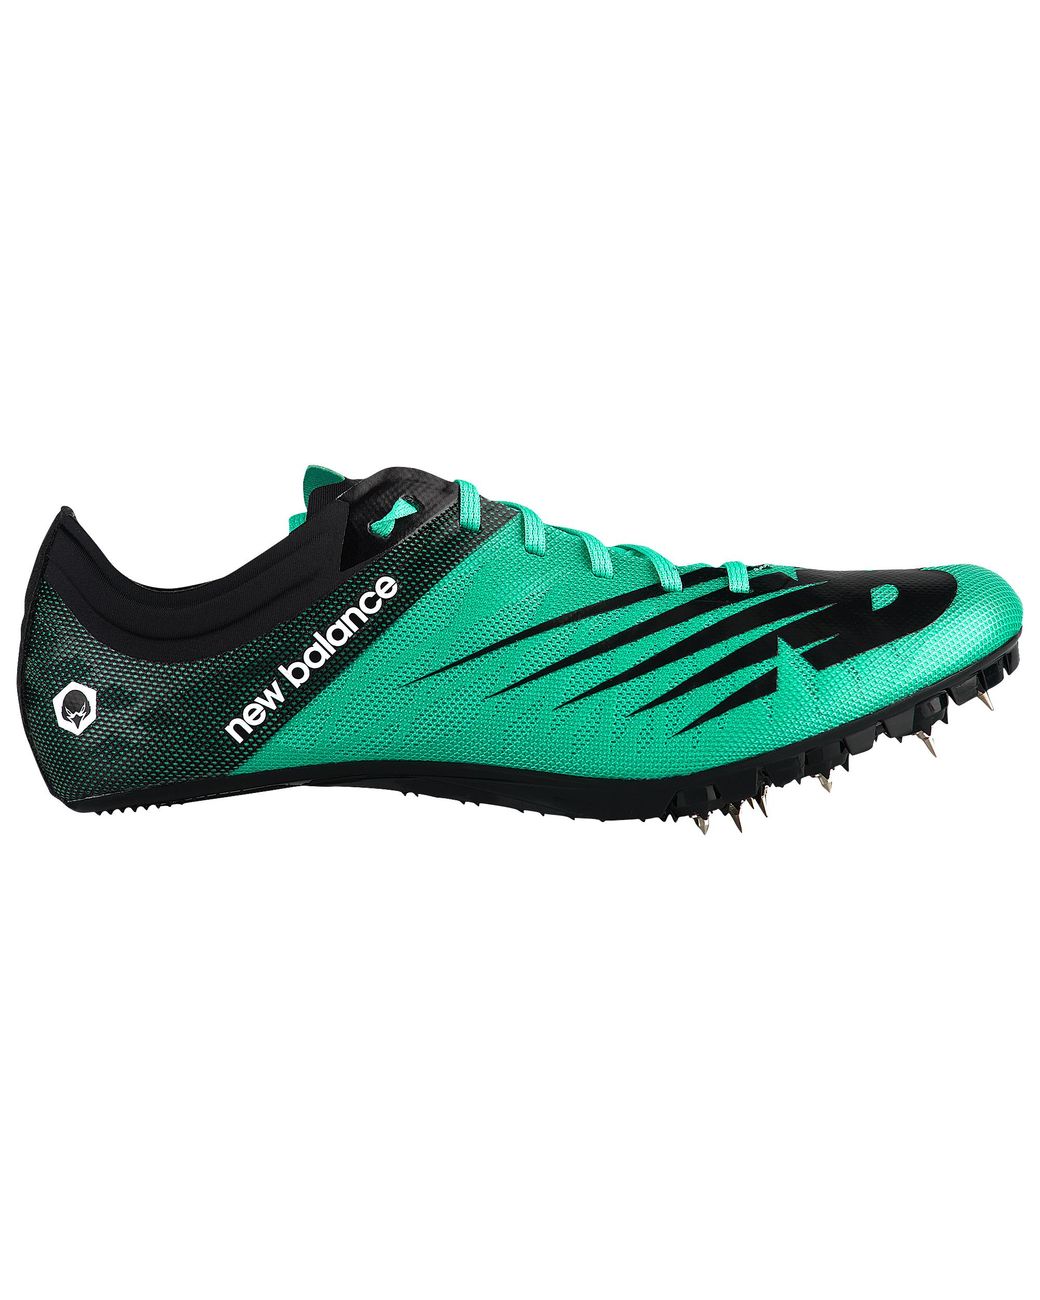 New Balance Vazee Verge Sprint Spikes in Green for Men - Lyst